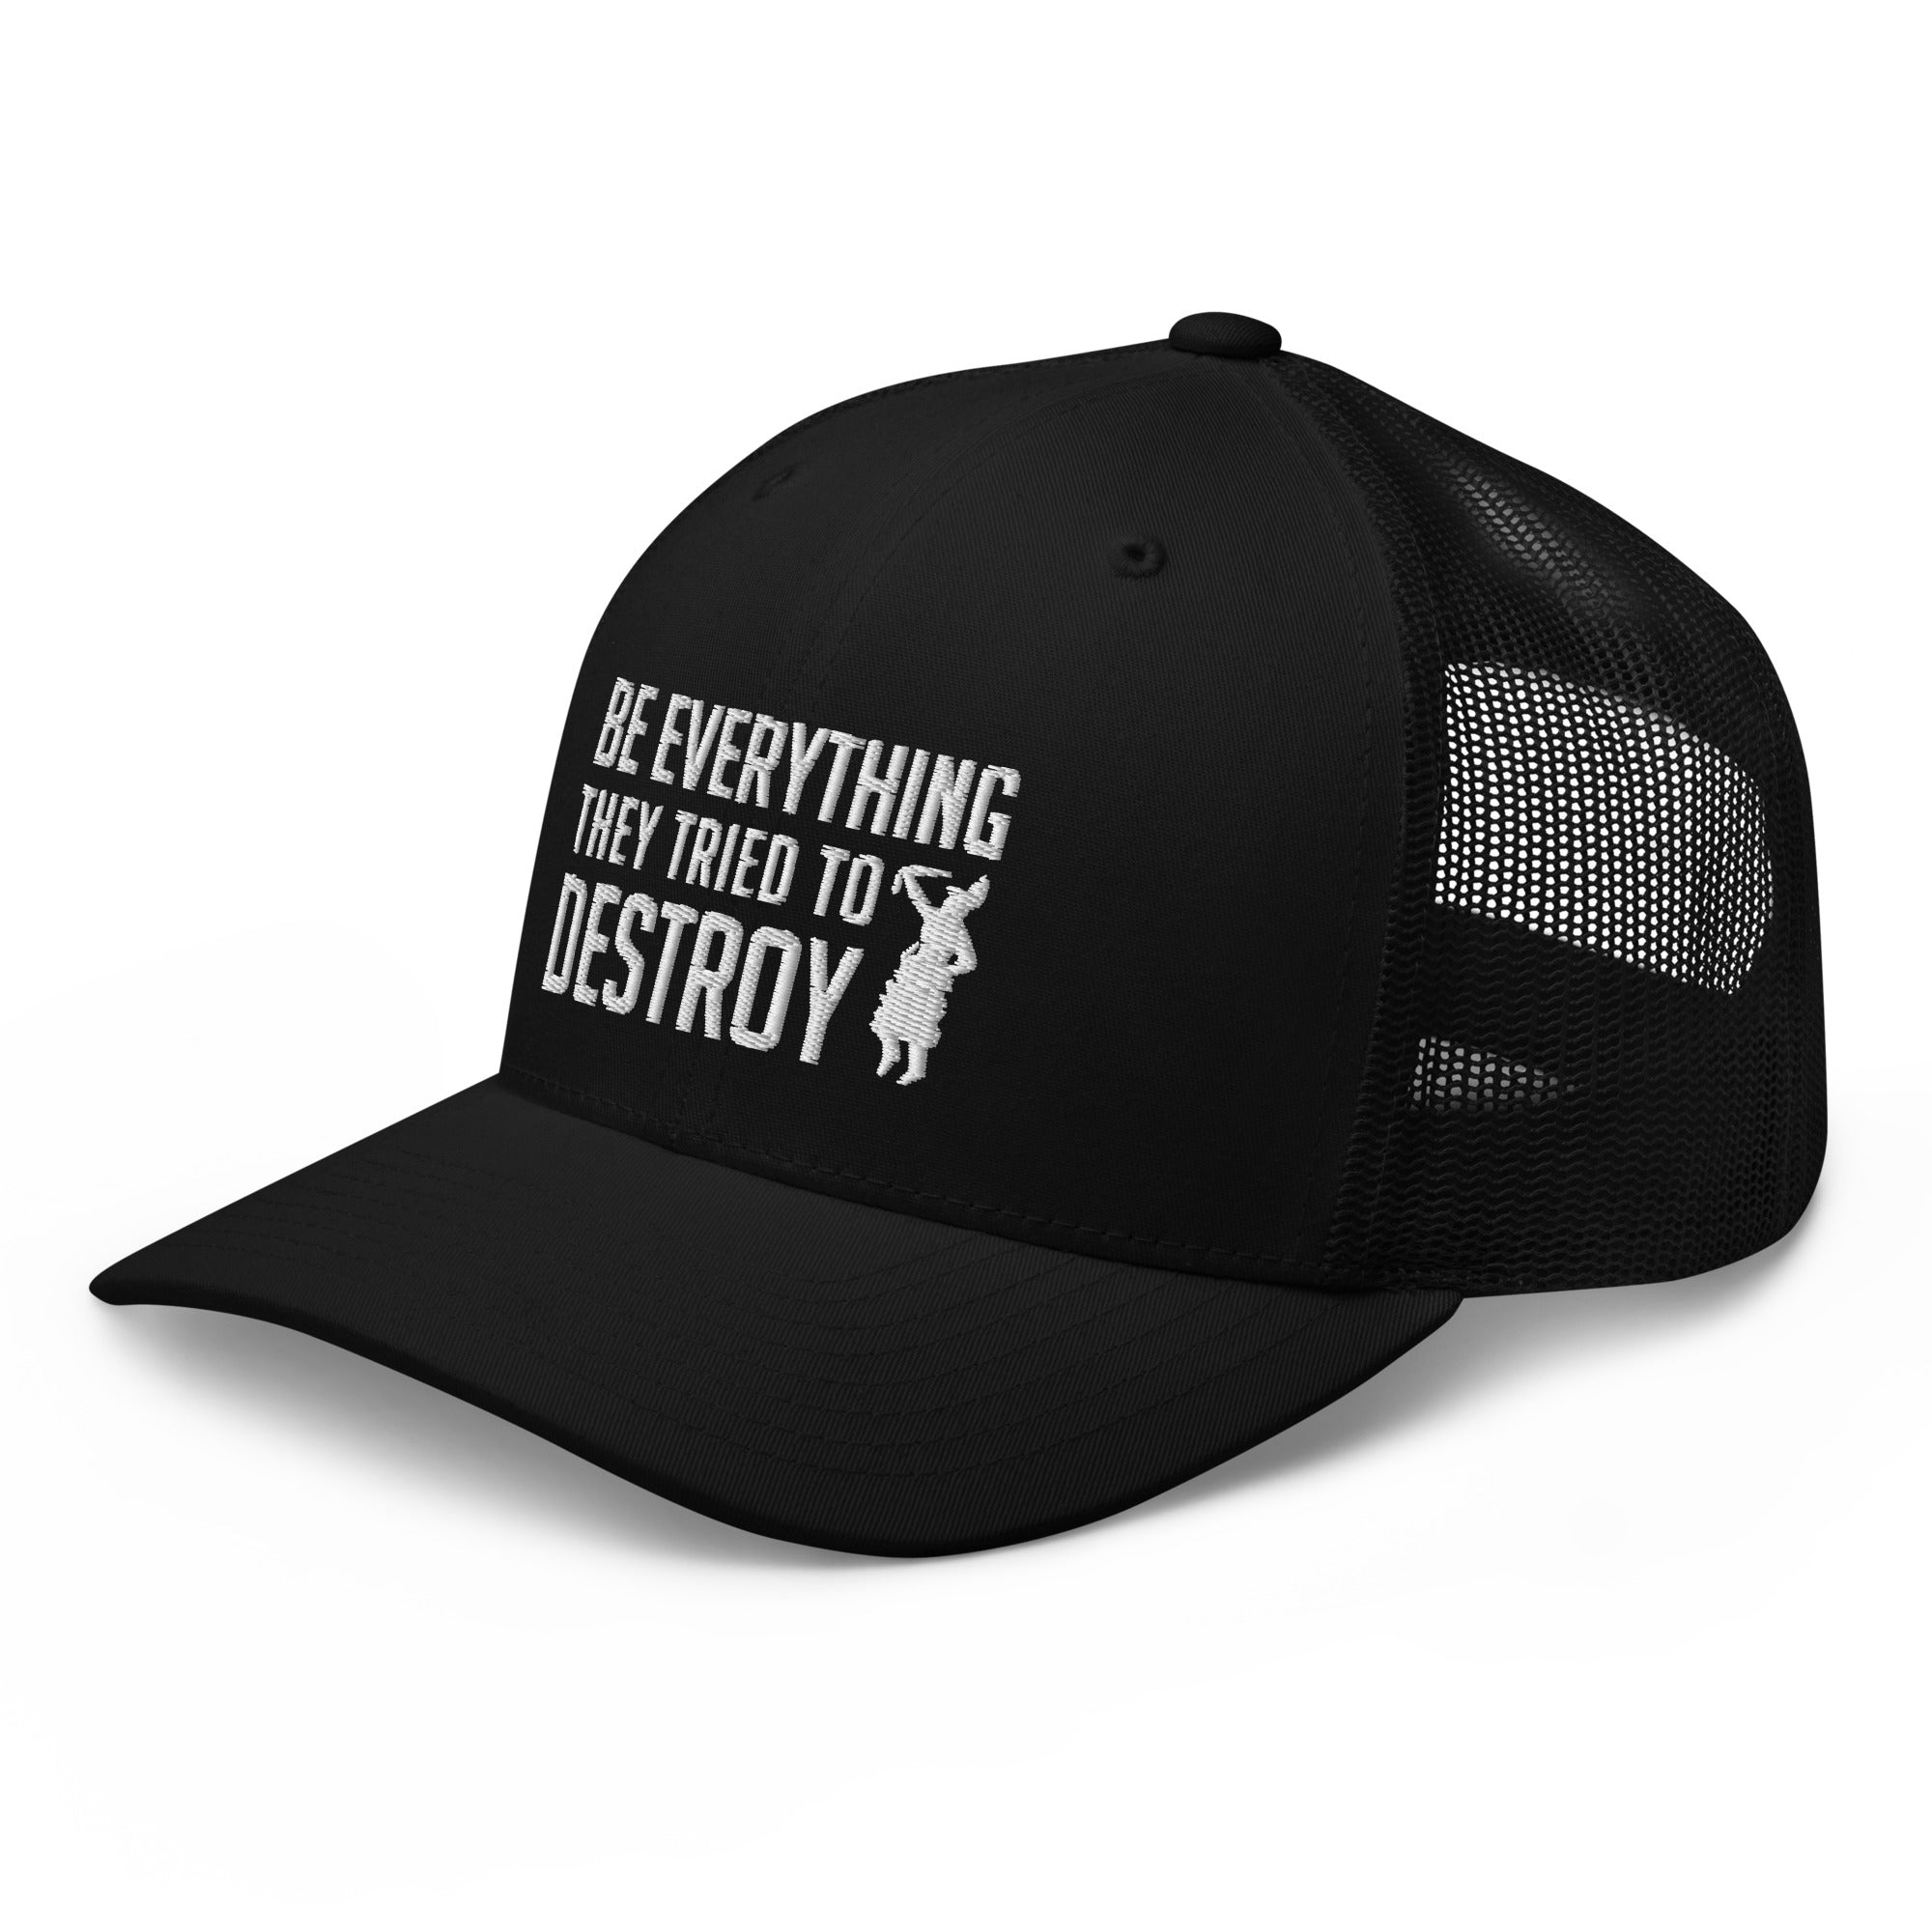 Be Everything The Tried to Destroy Mesh Cap